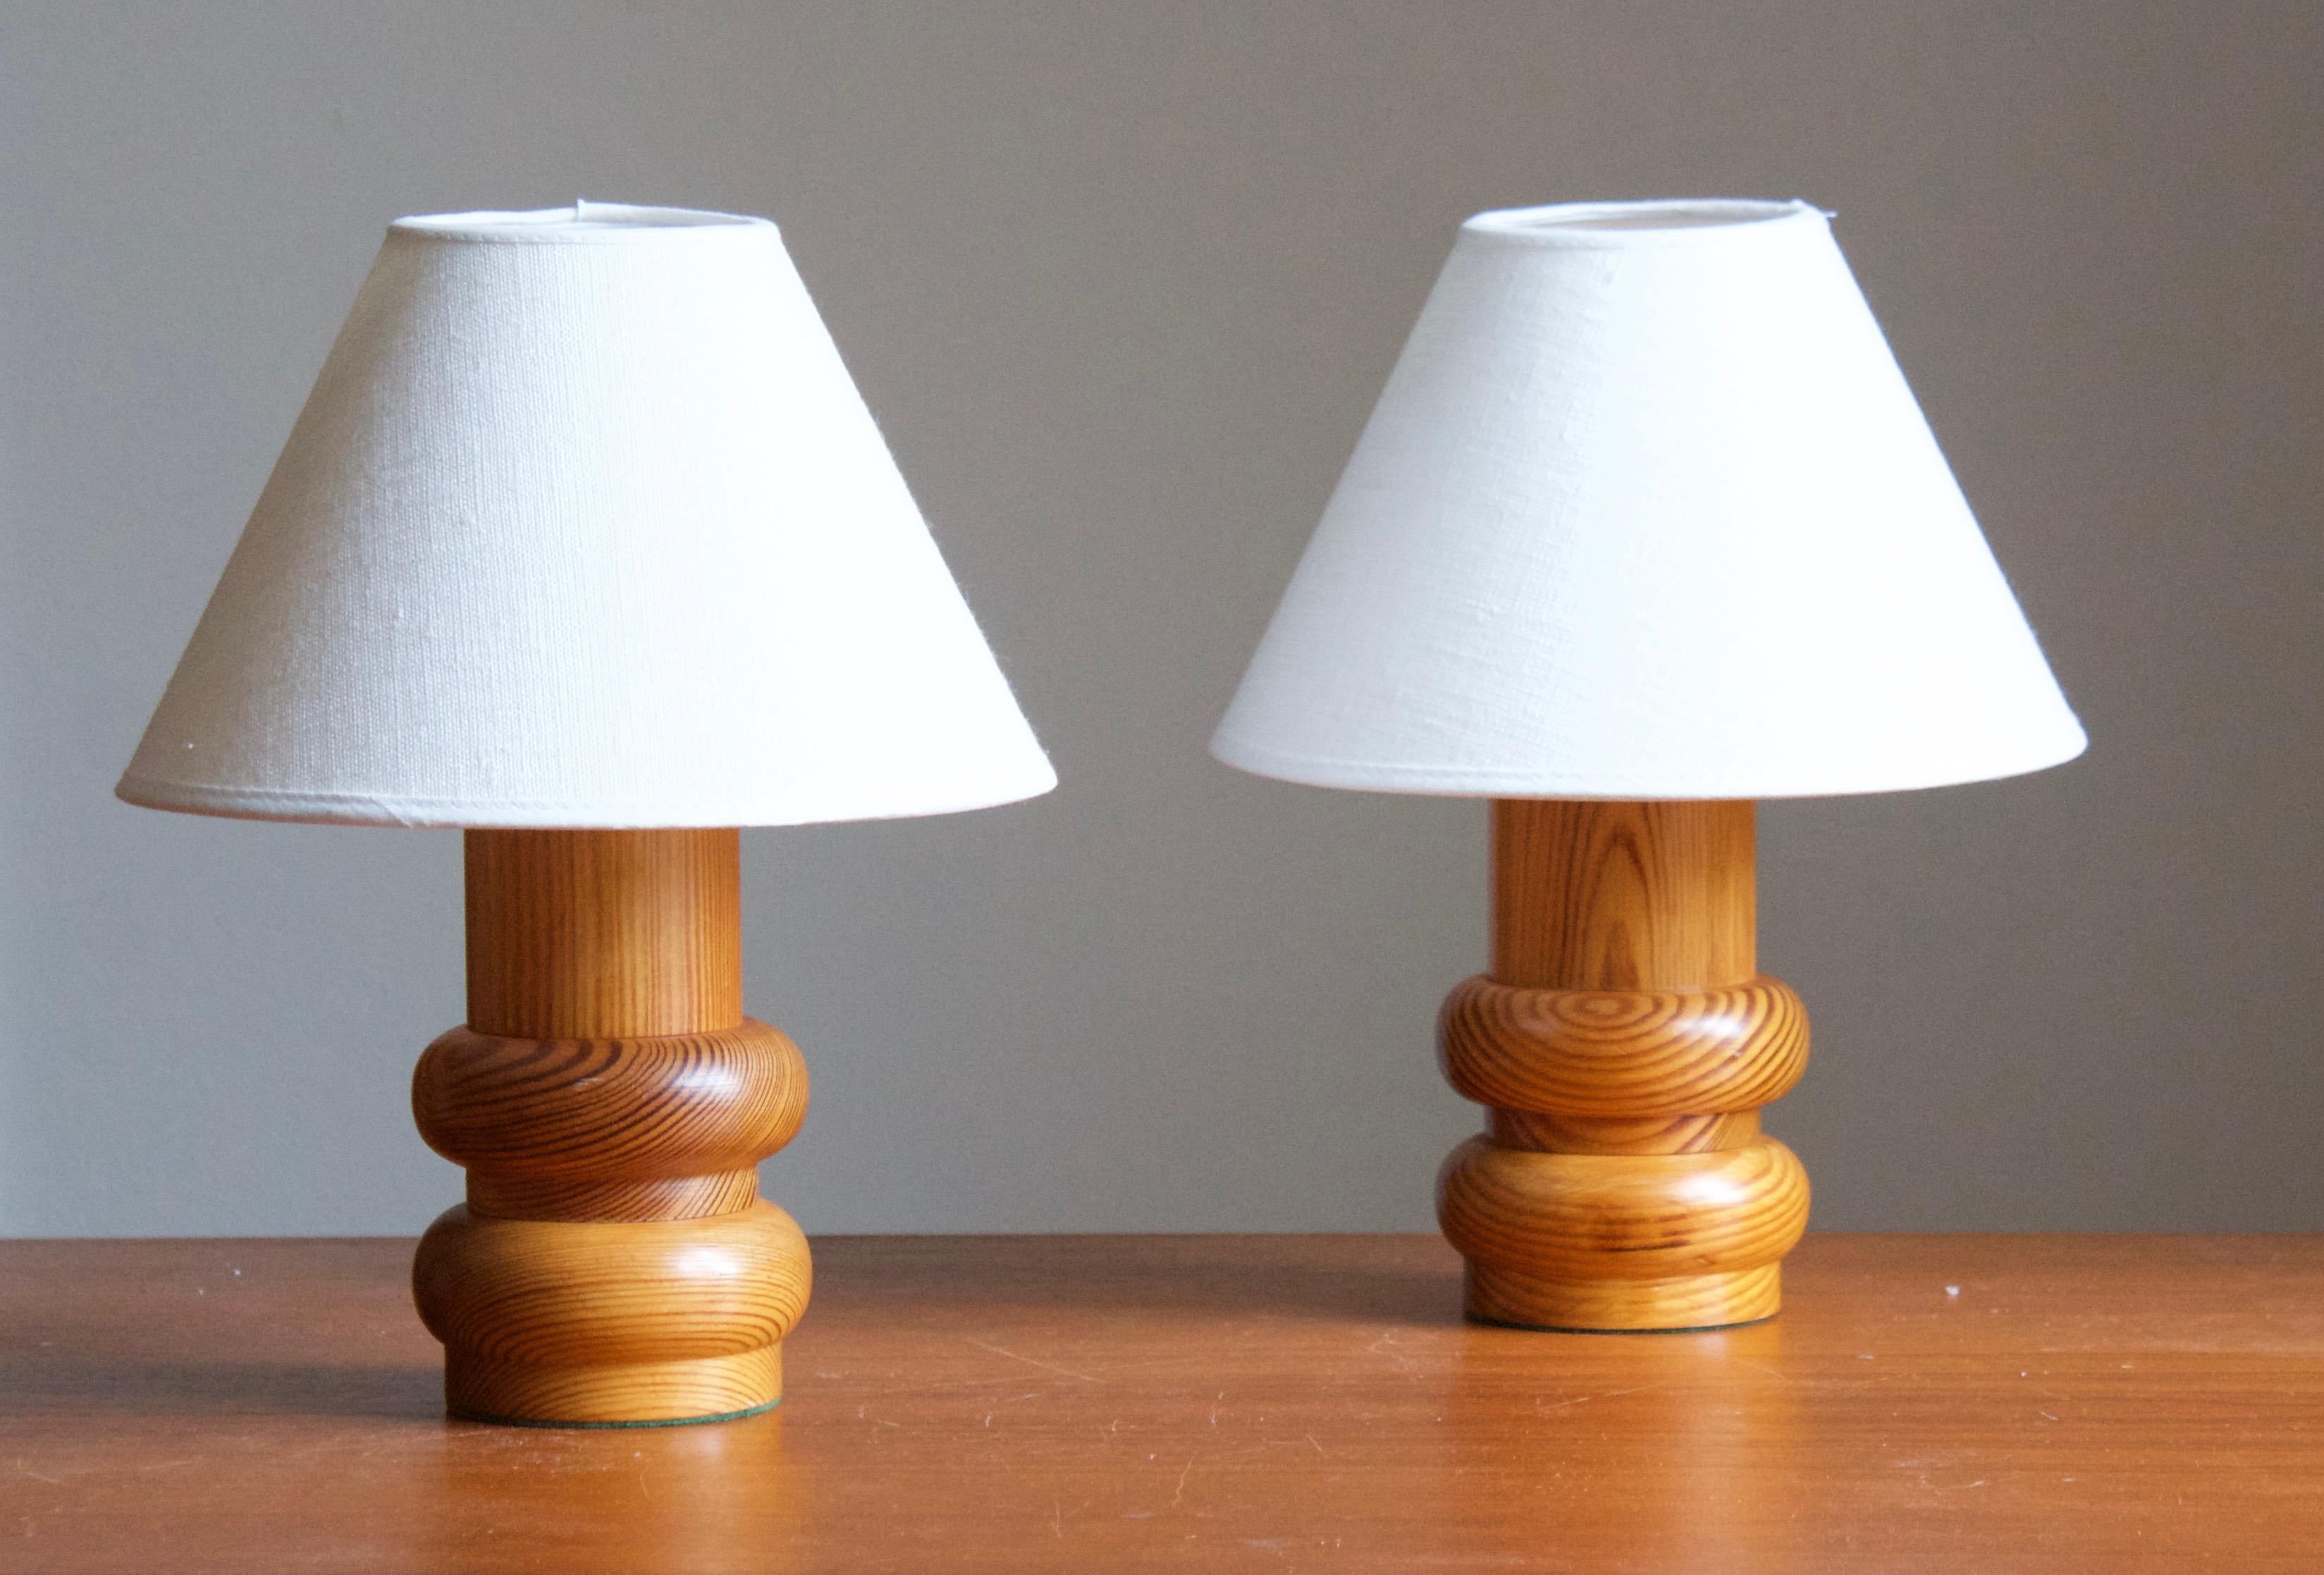 A pair of small pine table lamps, designed and produced in Sweden, c. 1970s. 

Stated dimensions exclude lampshade. Height includes socket. Sold without lampshades.